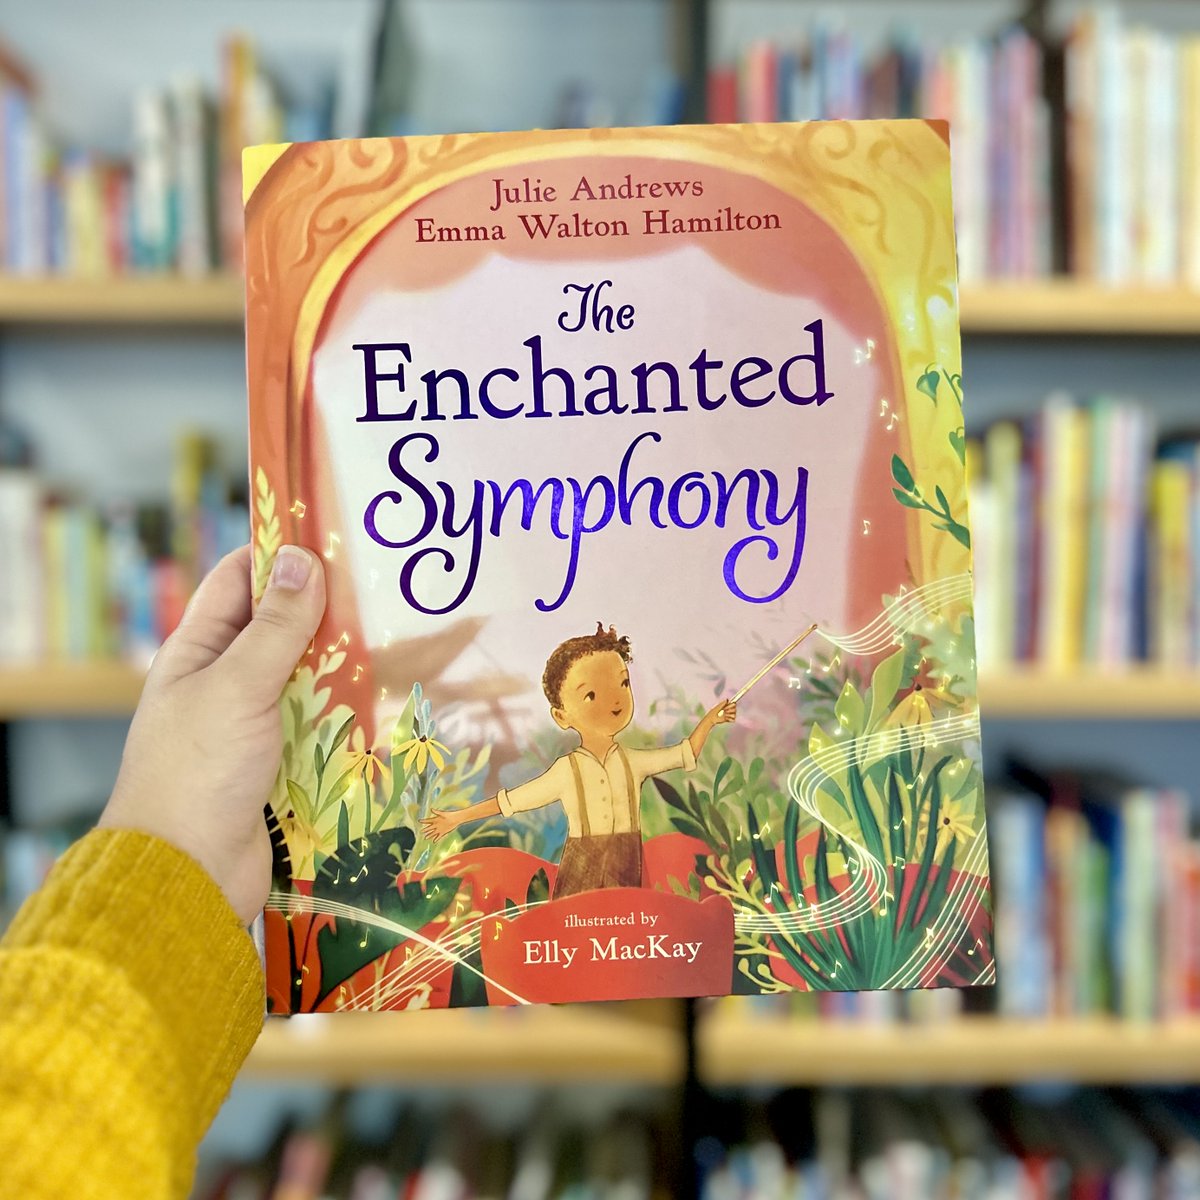 Celebrate life’s simple pleasures. Rejoice in what matters most. Add this inspiring picture book from @julieandrews, @ewhamilton, and @theaterclouds to your bookshelf today! #TheEnchantedSymphony bit.ly/3XOsCyR